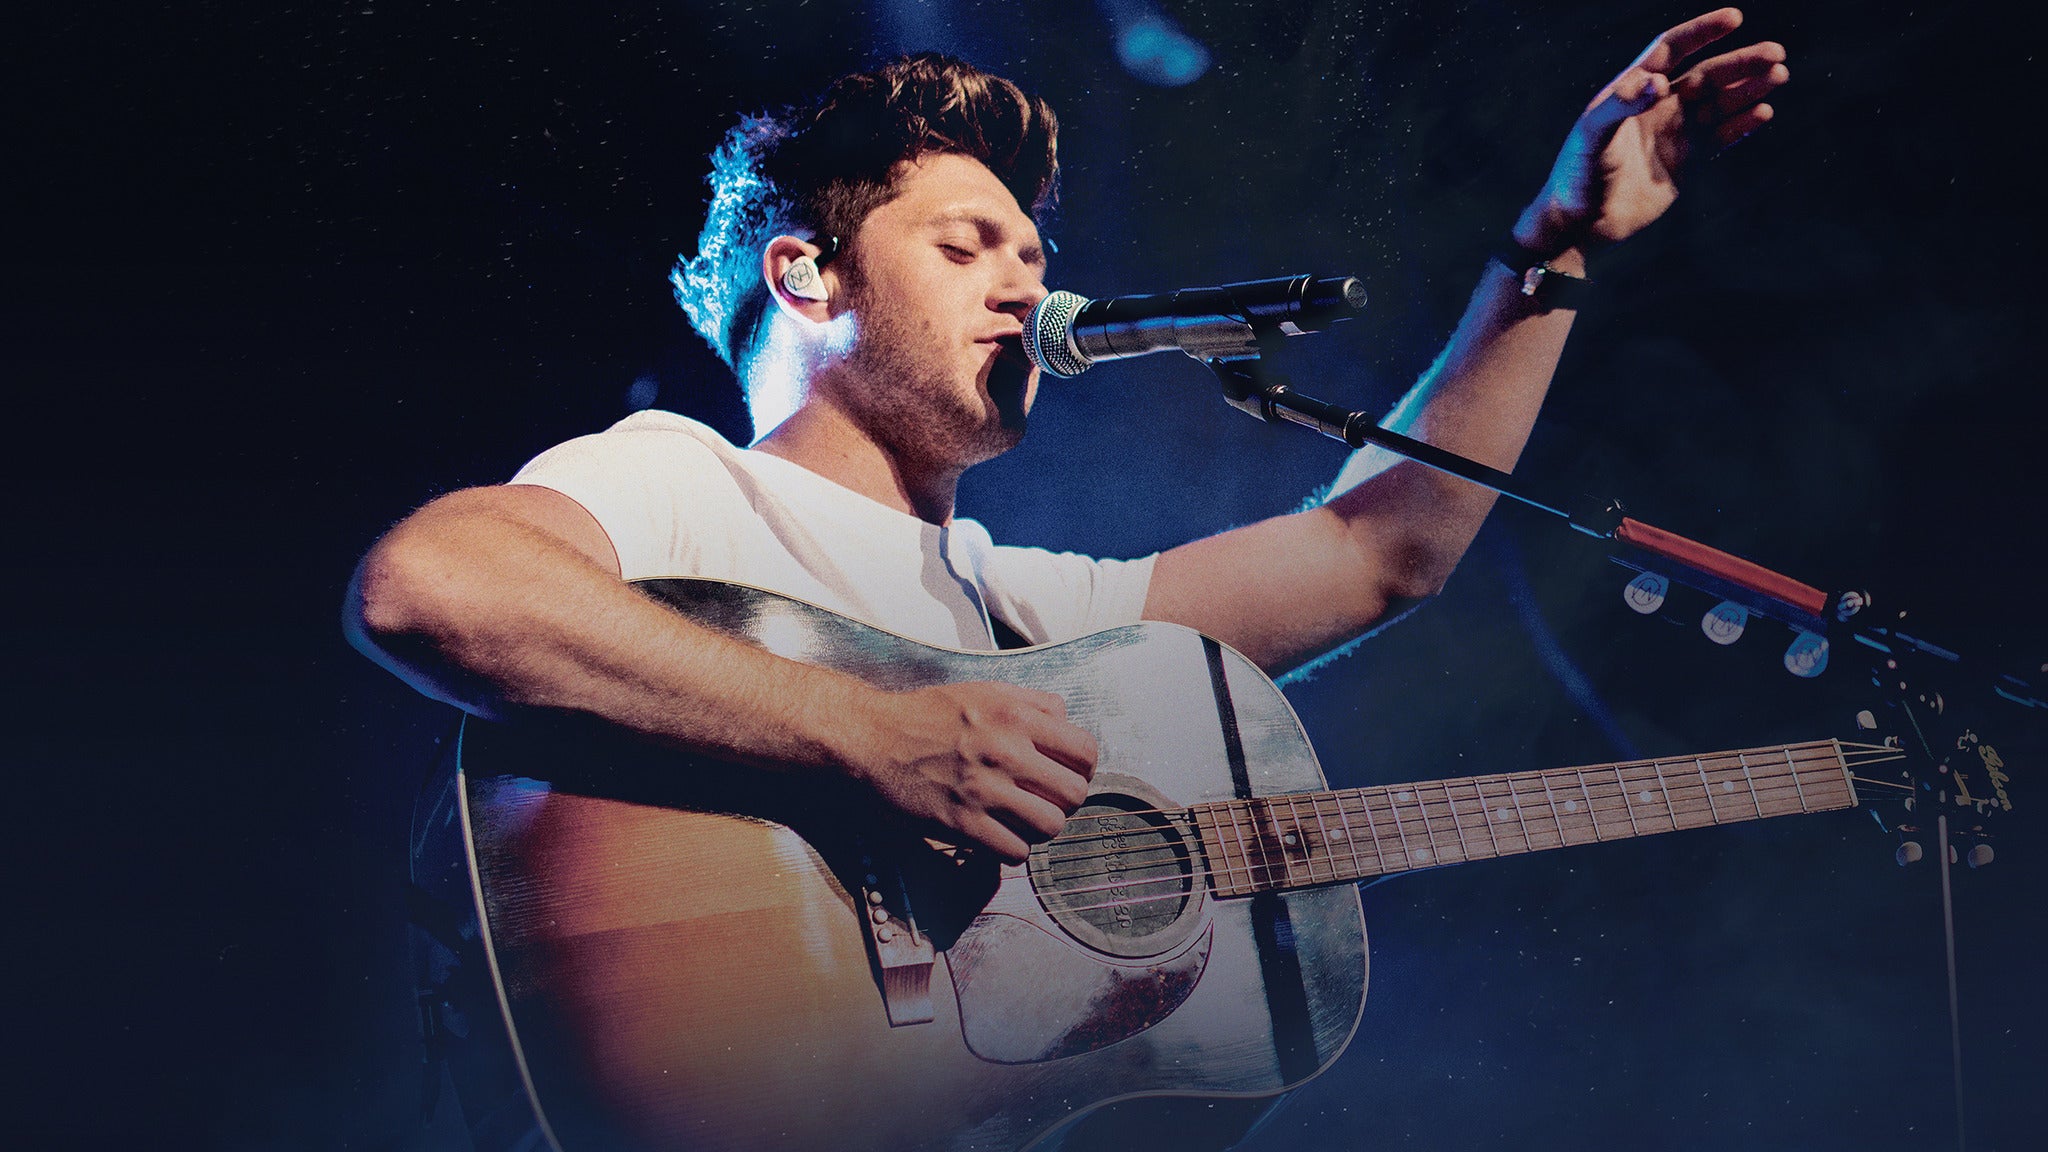 Honda Civic Tour presents Niall Horan, Nice To Meet Ya in Mansfield promo photo for Live Nation Mobile App presale offer code